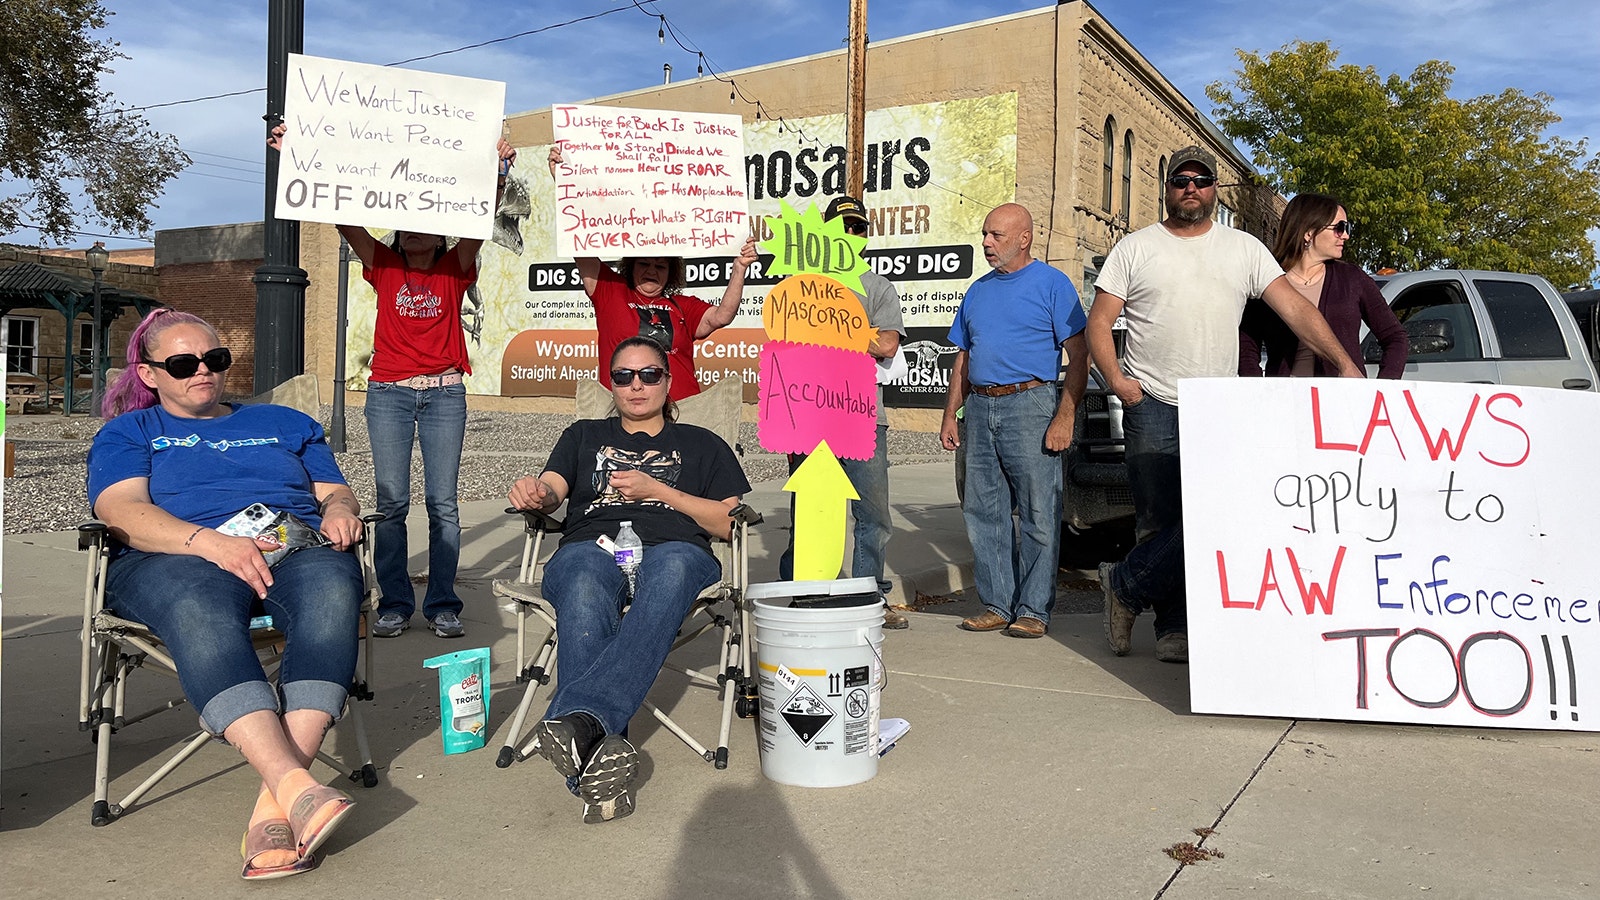 Jason Bowman, right in white T-shirt, led roughly a dozen protestors Monday in Thermopolis, urging the town to hold police Sgt. Mike Mascorro responsible for entering a man’s home illegally April 28 and triggering a gunfight that led to the man’s death.